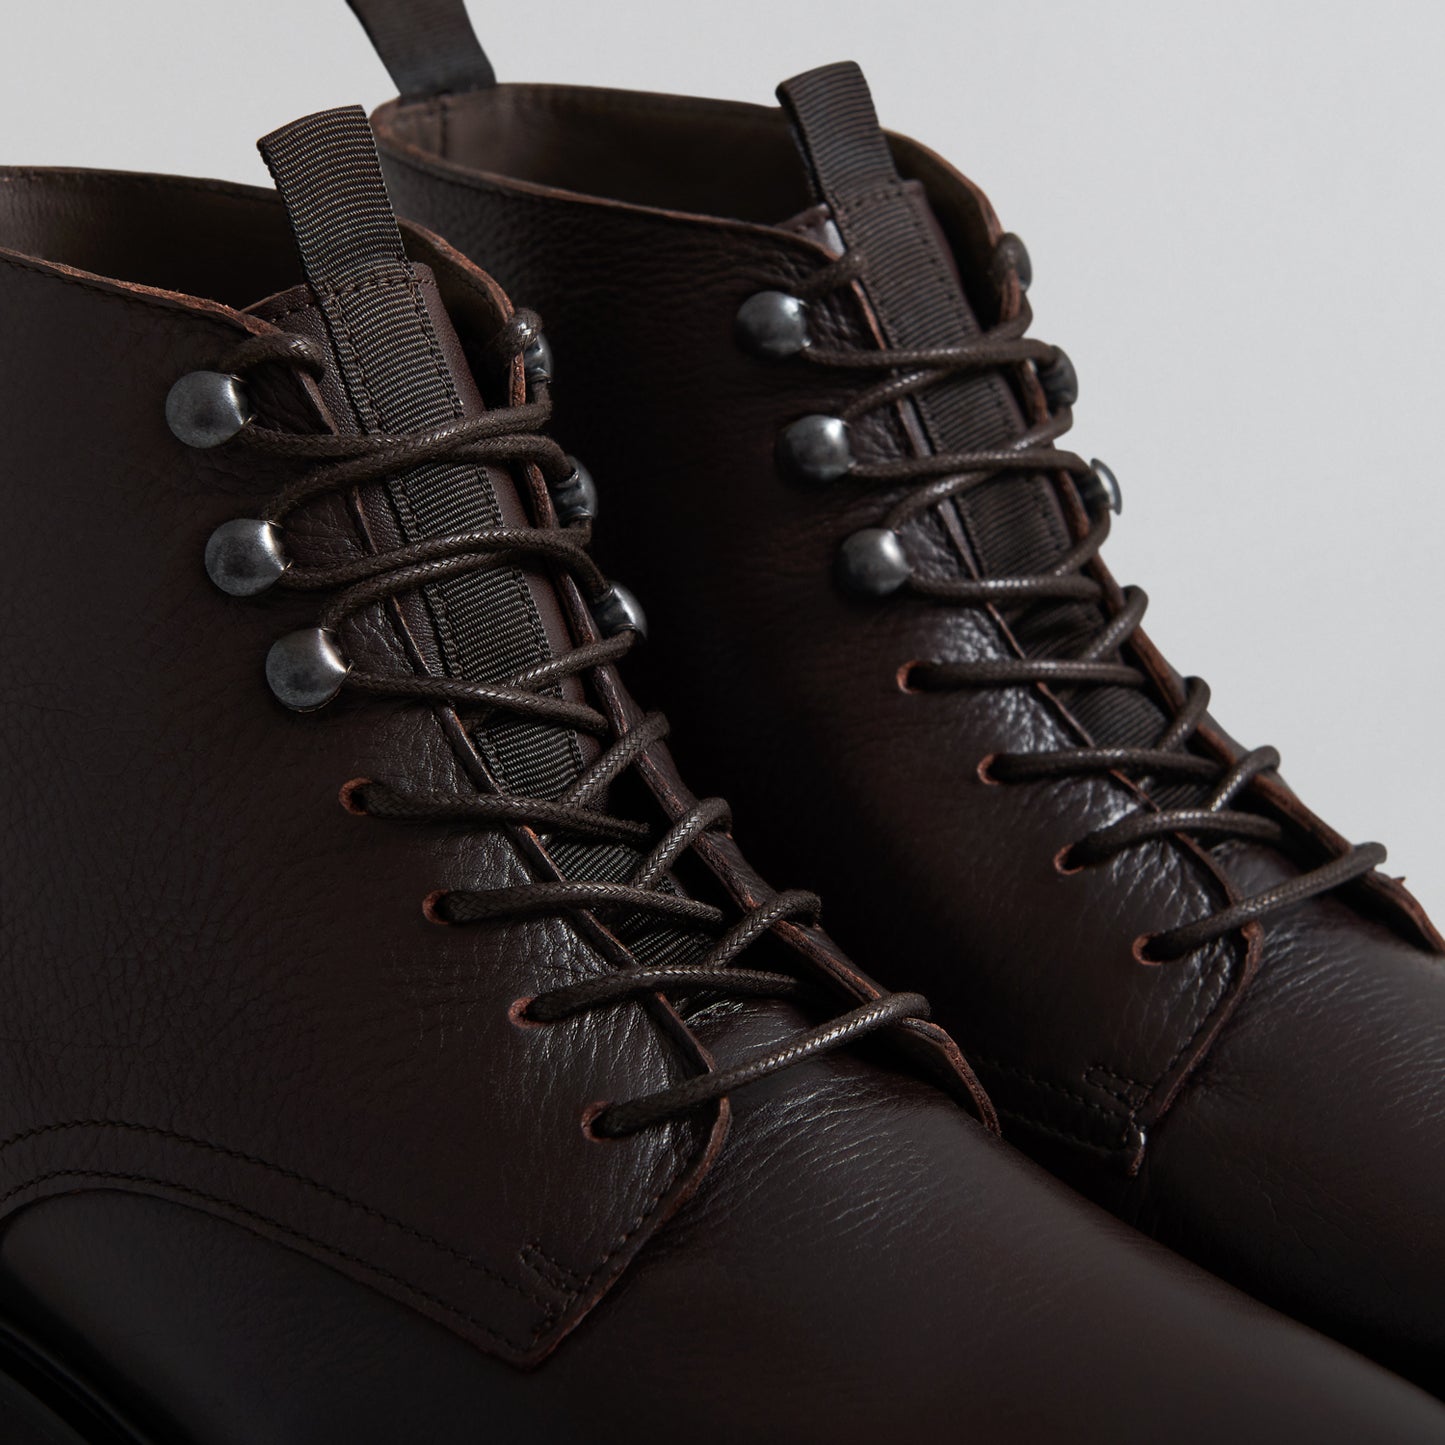 HOLBROOK BROWN BOOT